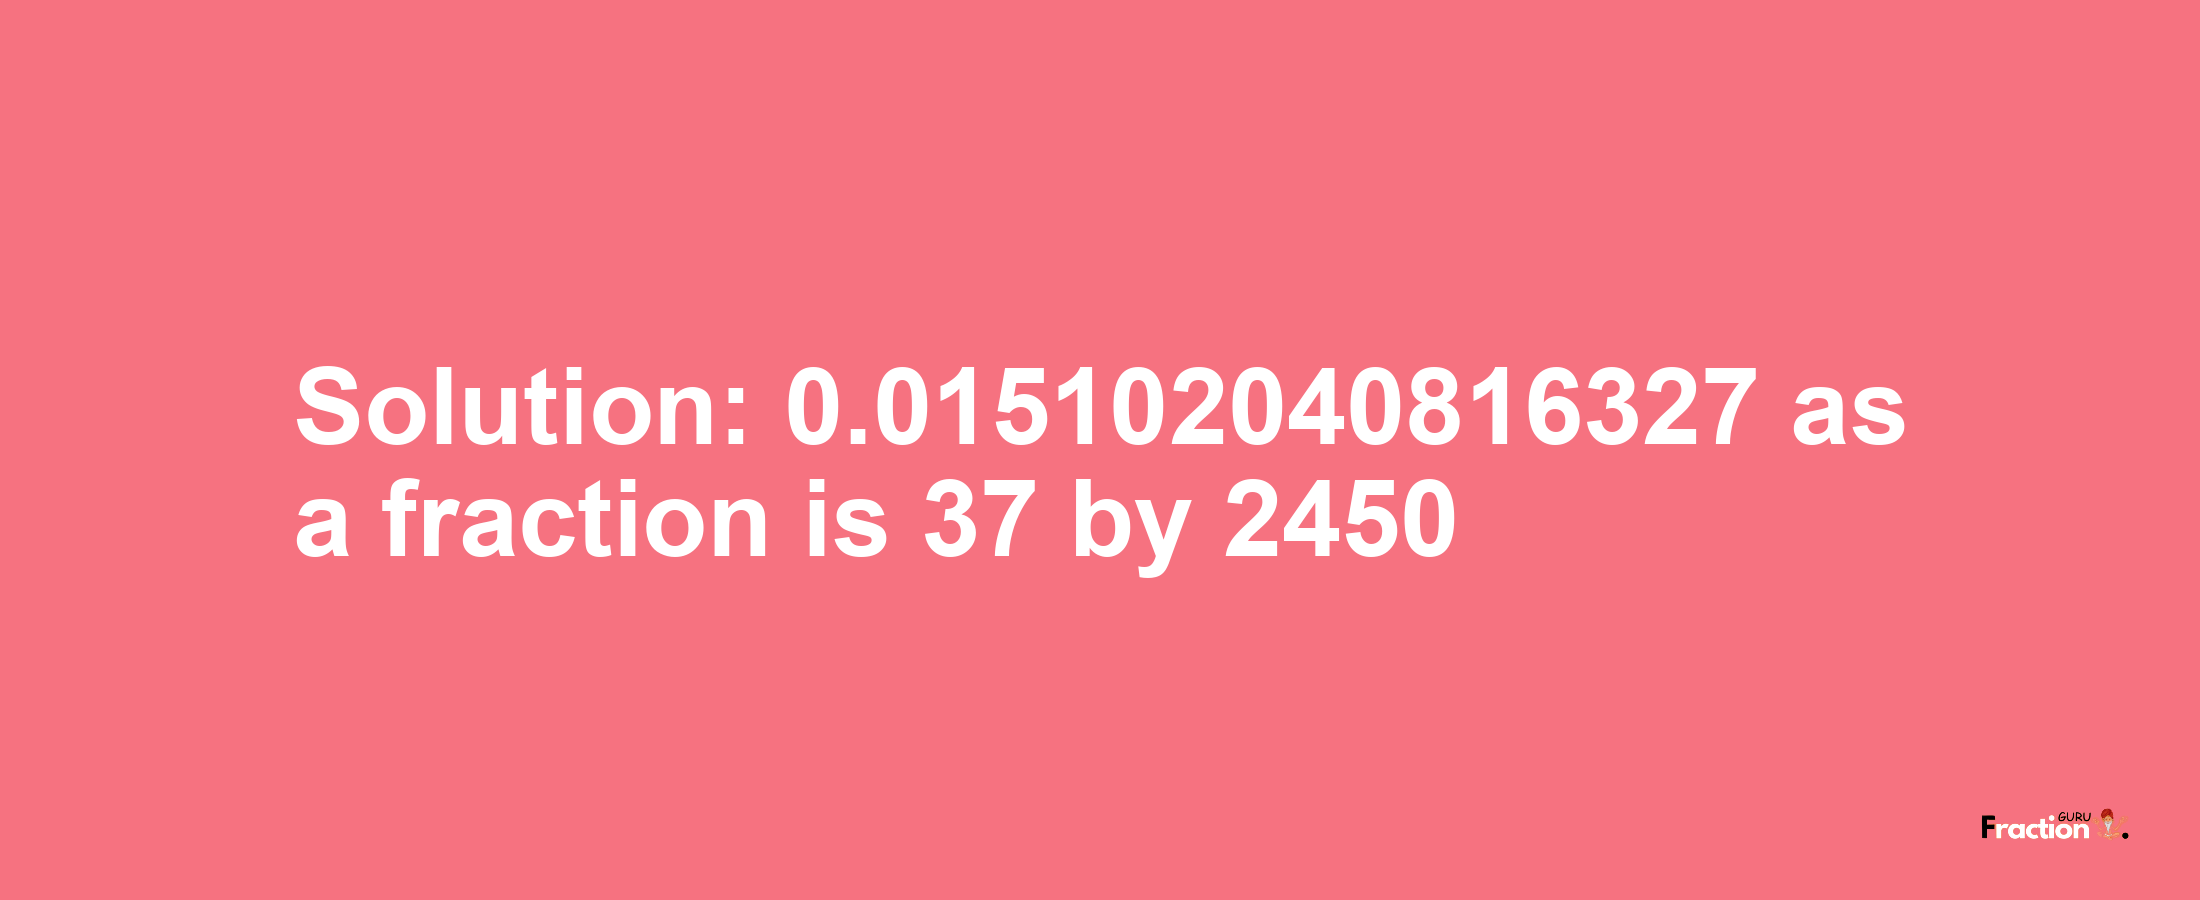 Solution:0.015102040816327 as a fraction is 37/2450